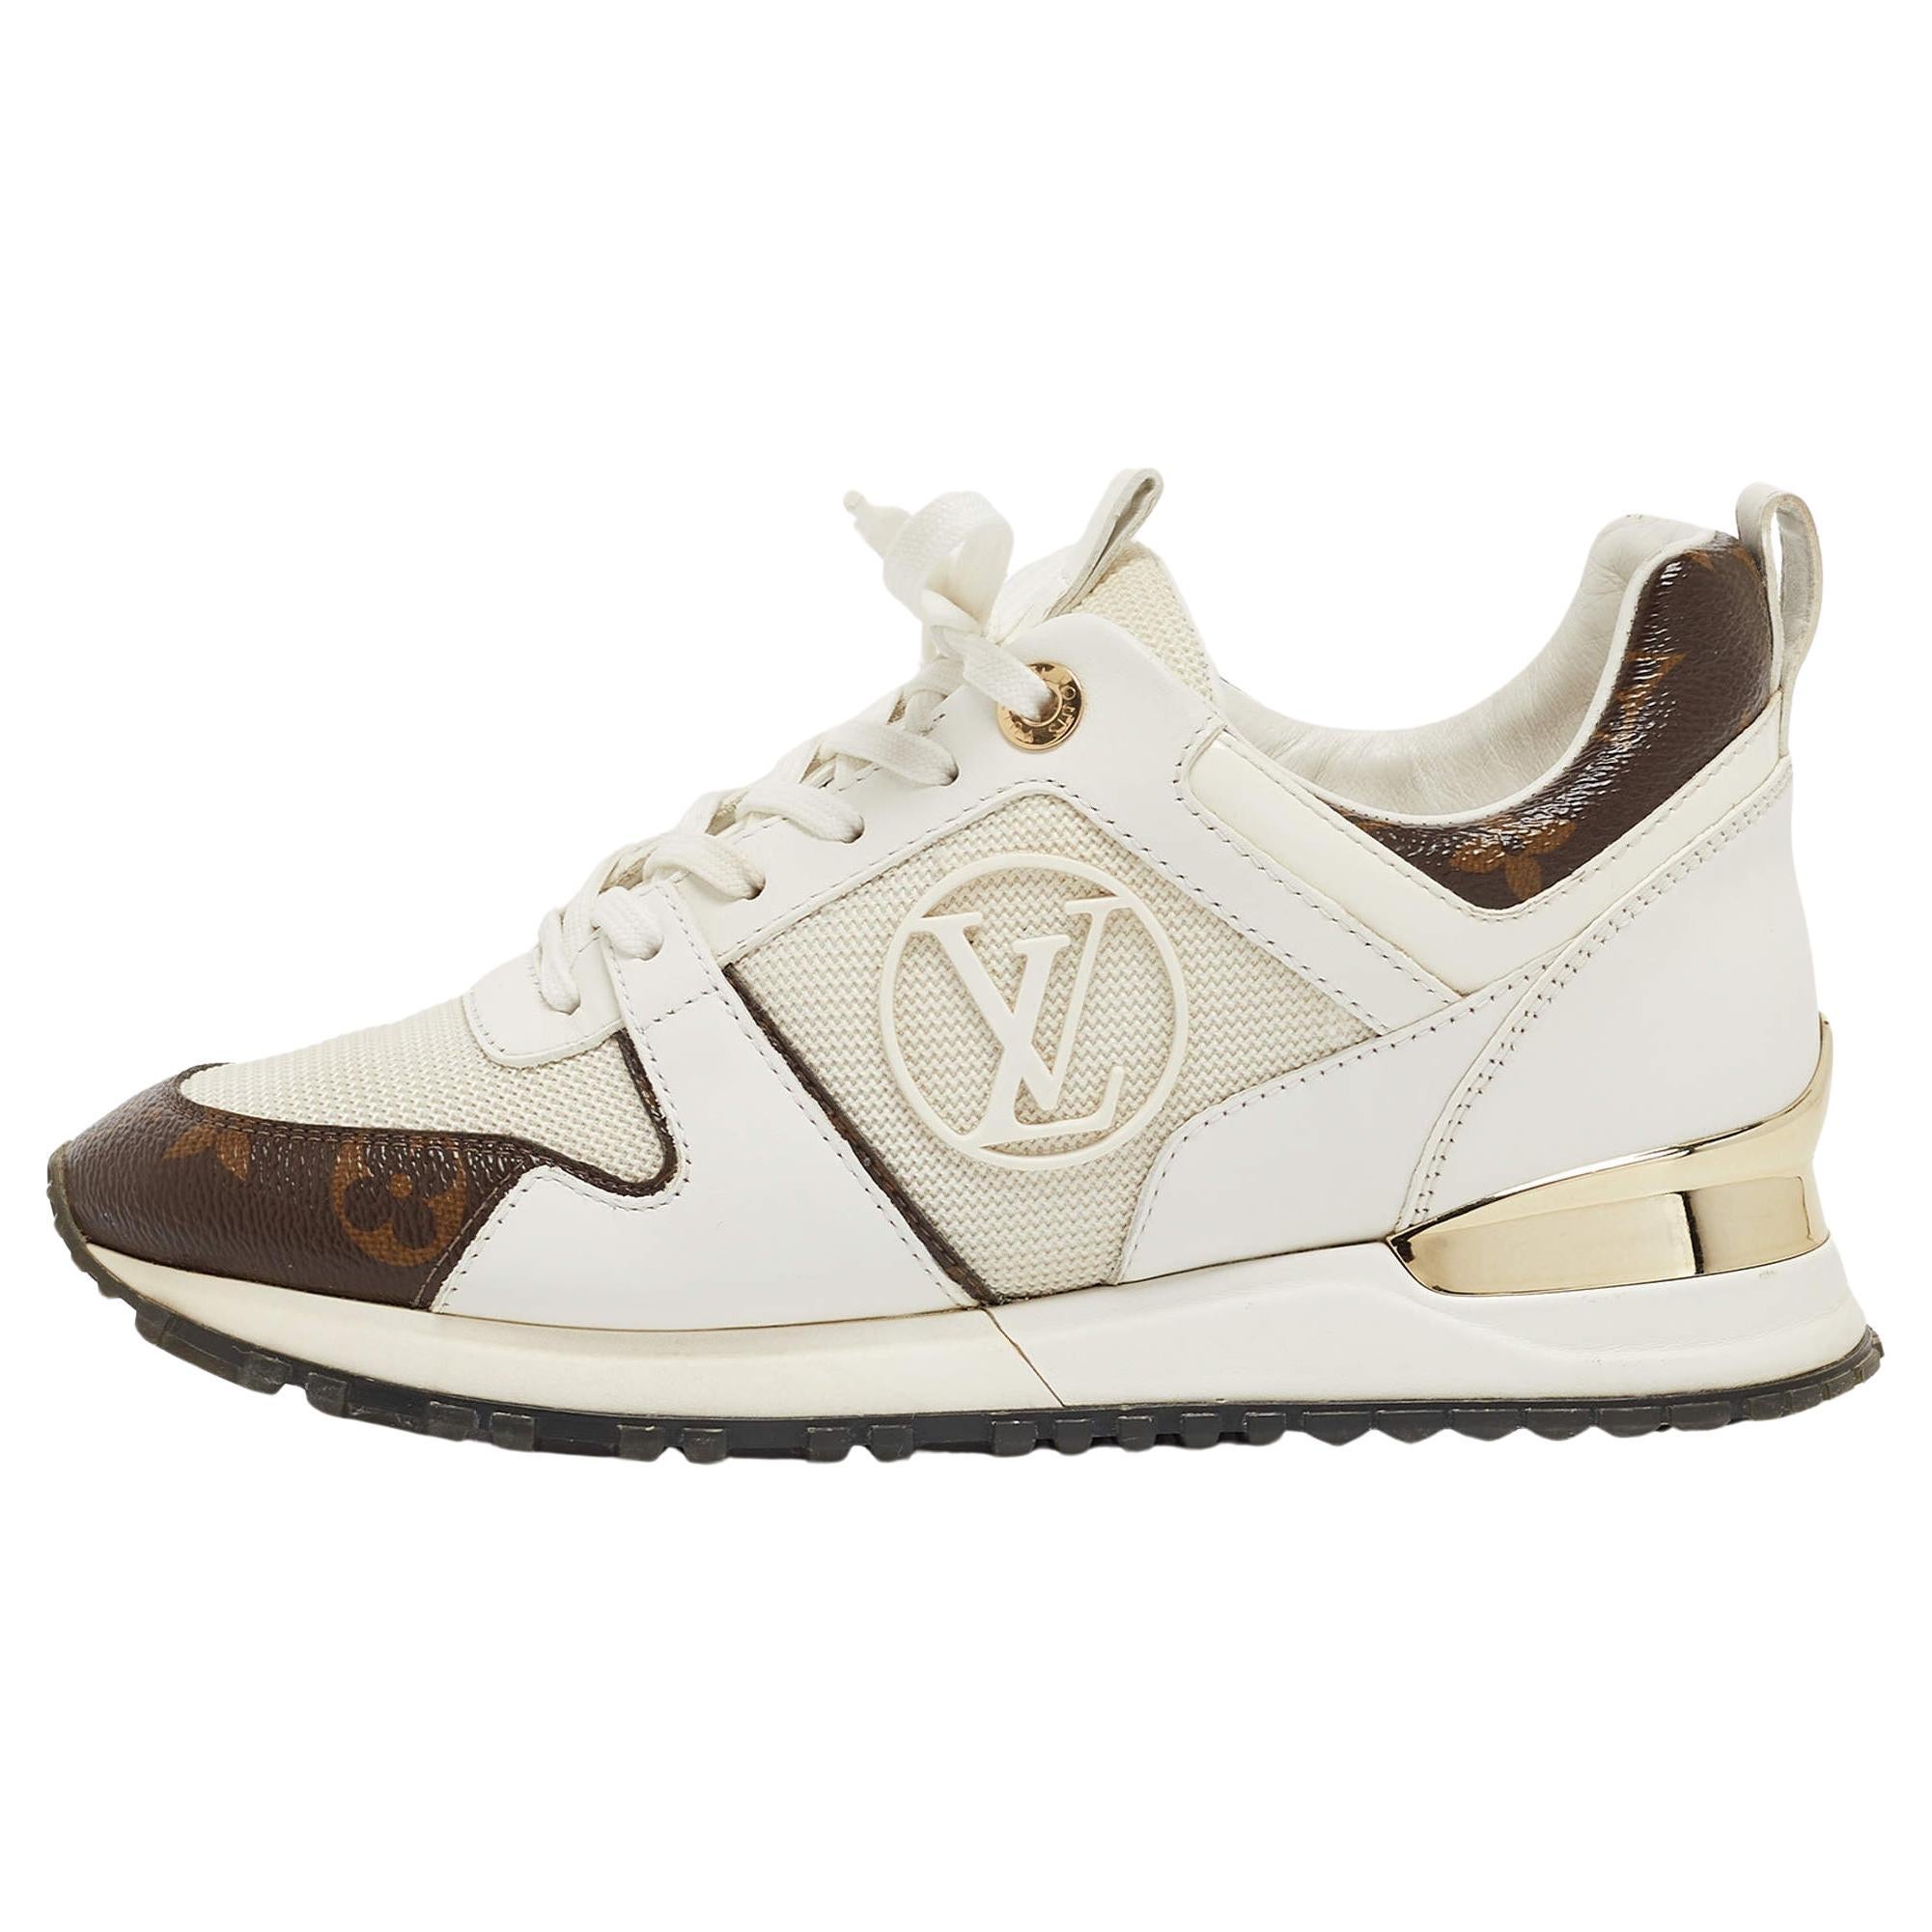 Louis Vuitton White/Monogram Canvas and Leather Run Away Sneakers Size 36 For Sale